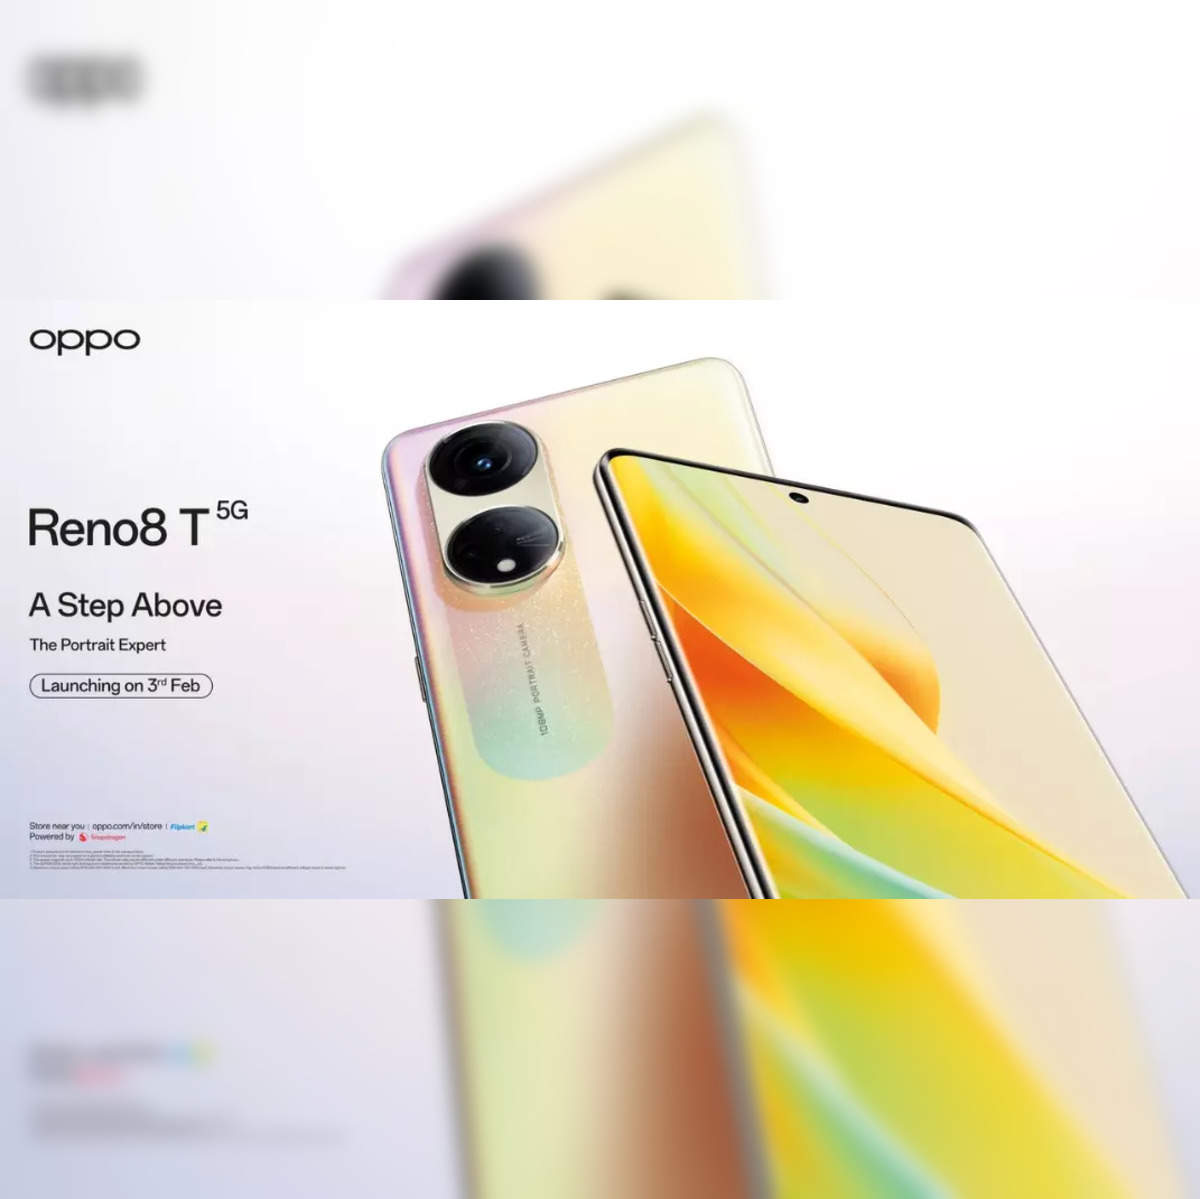 Buy Oppo Reno 8T 5G ( Midnight Black,8GB ,128GB ) at the Best Price in India